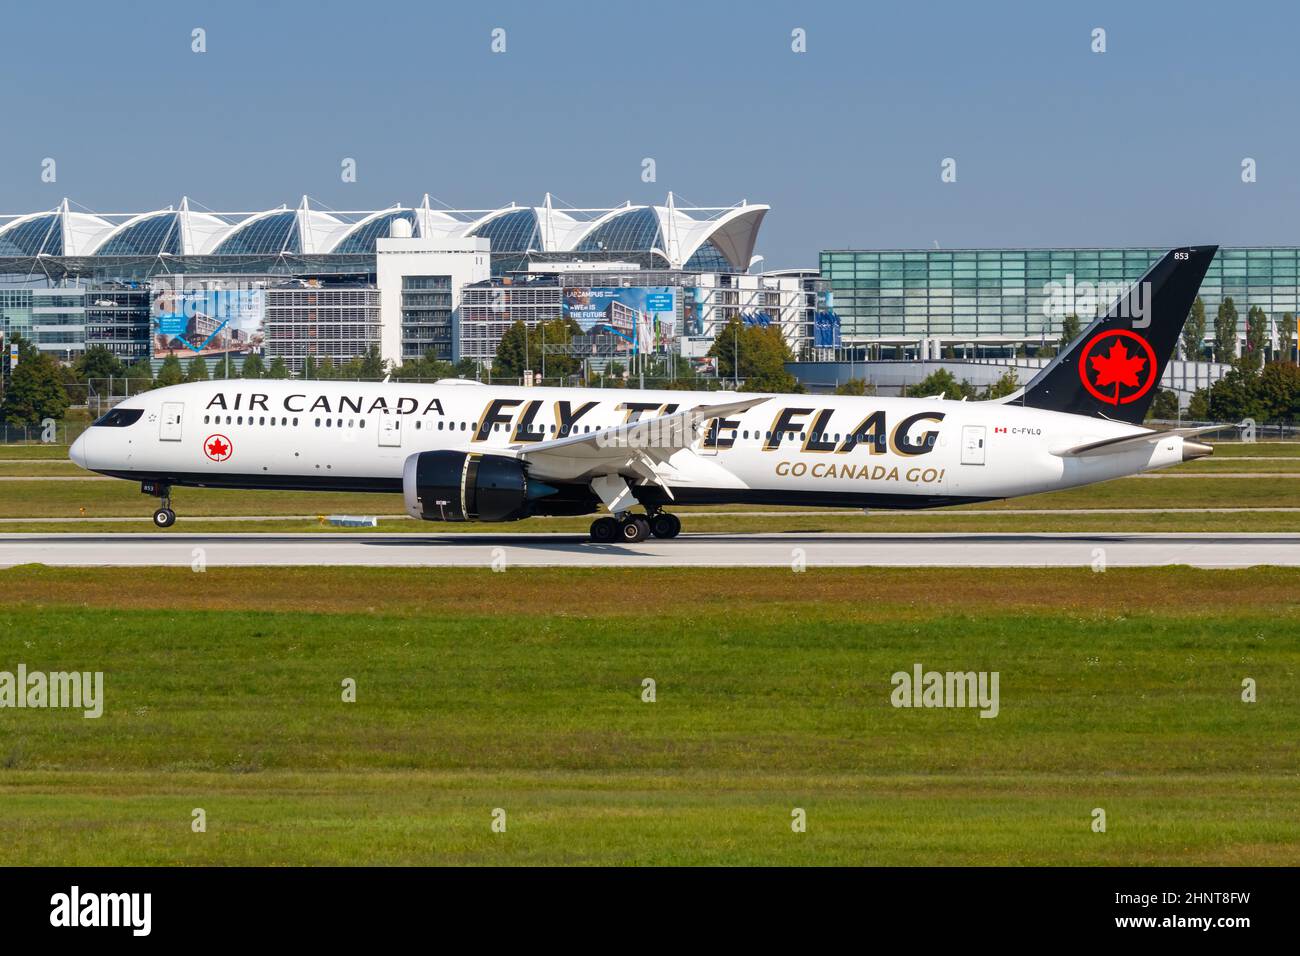 Air Canada Boeing 787-9 Dreamliner airplane Munich airport in Germany Fly The Flag special livery Stock Photo